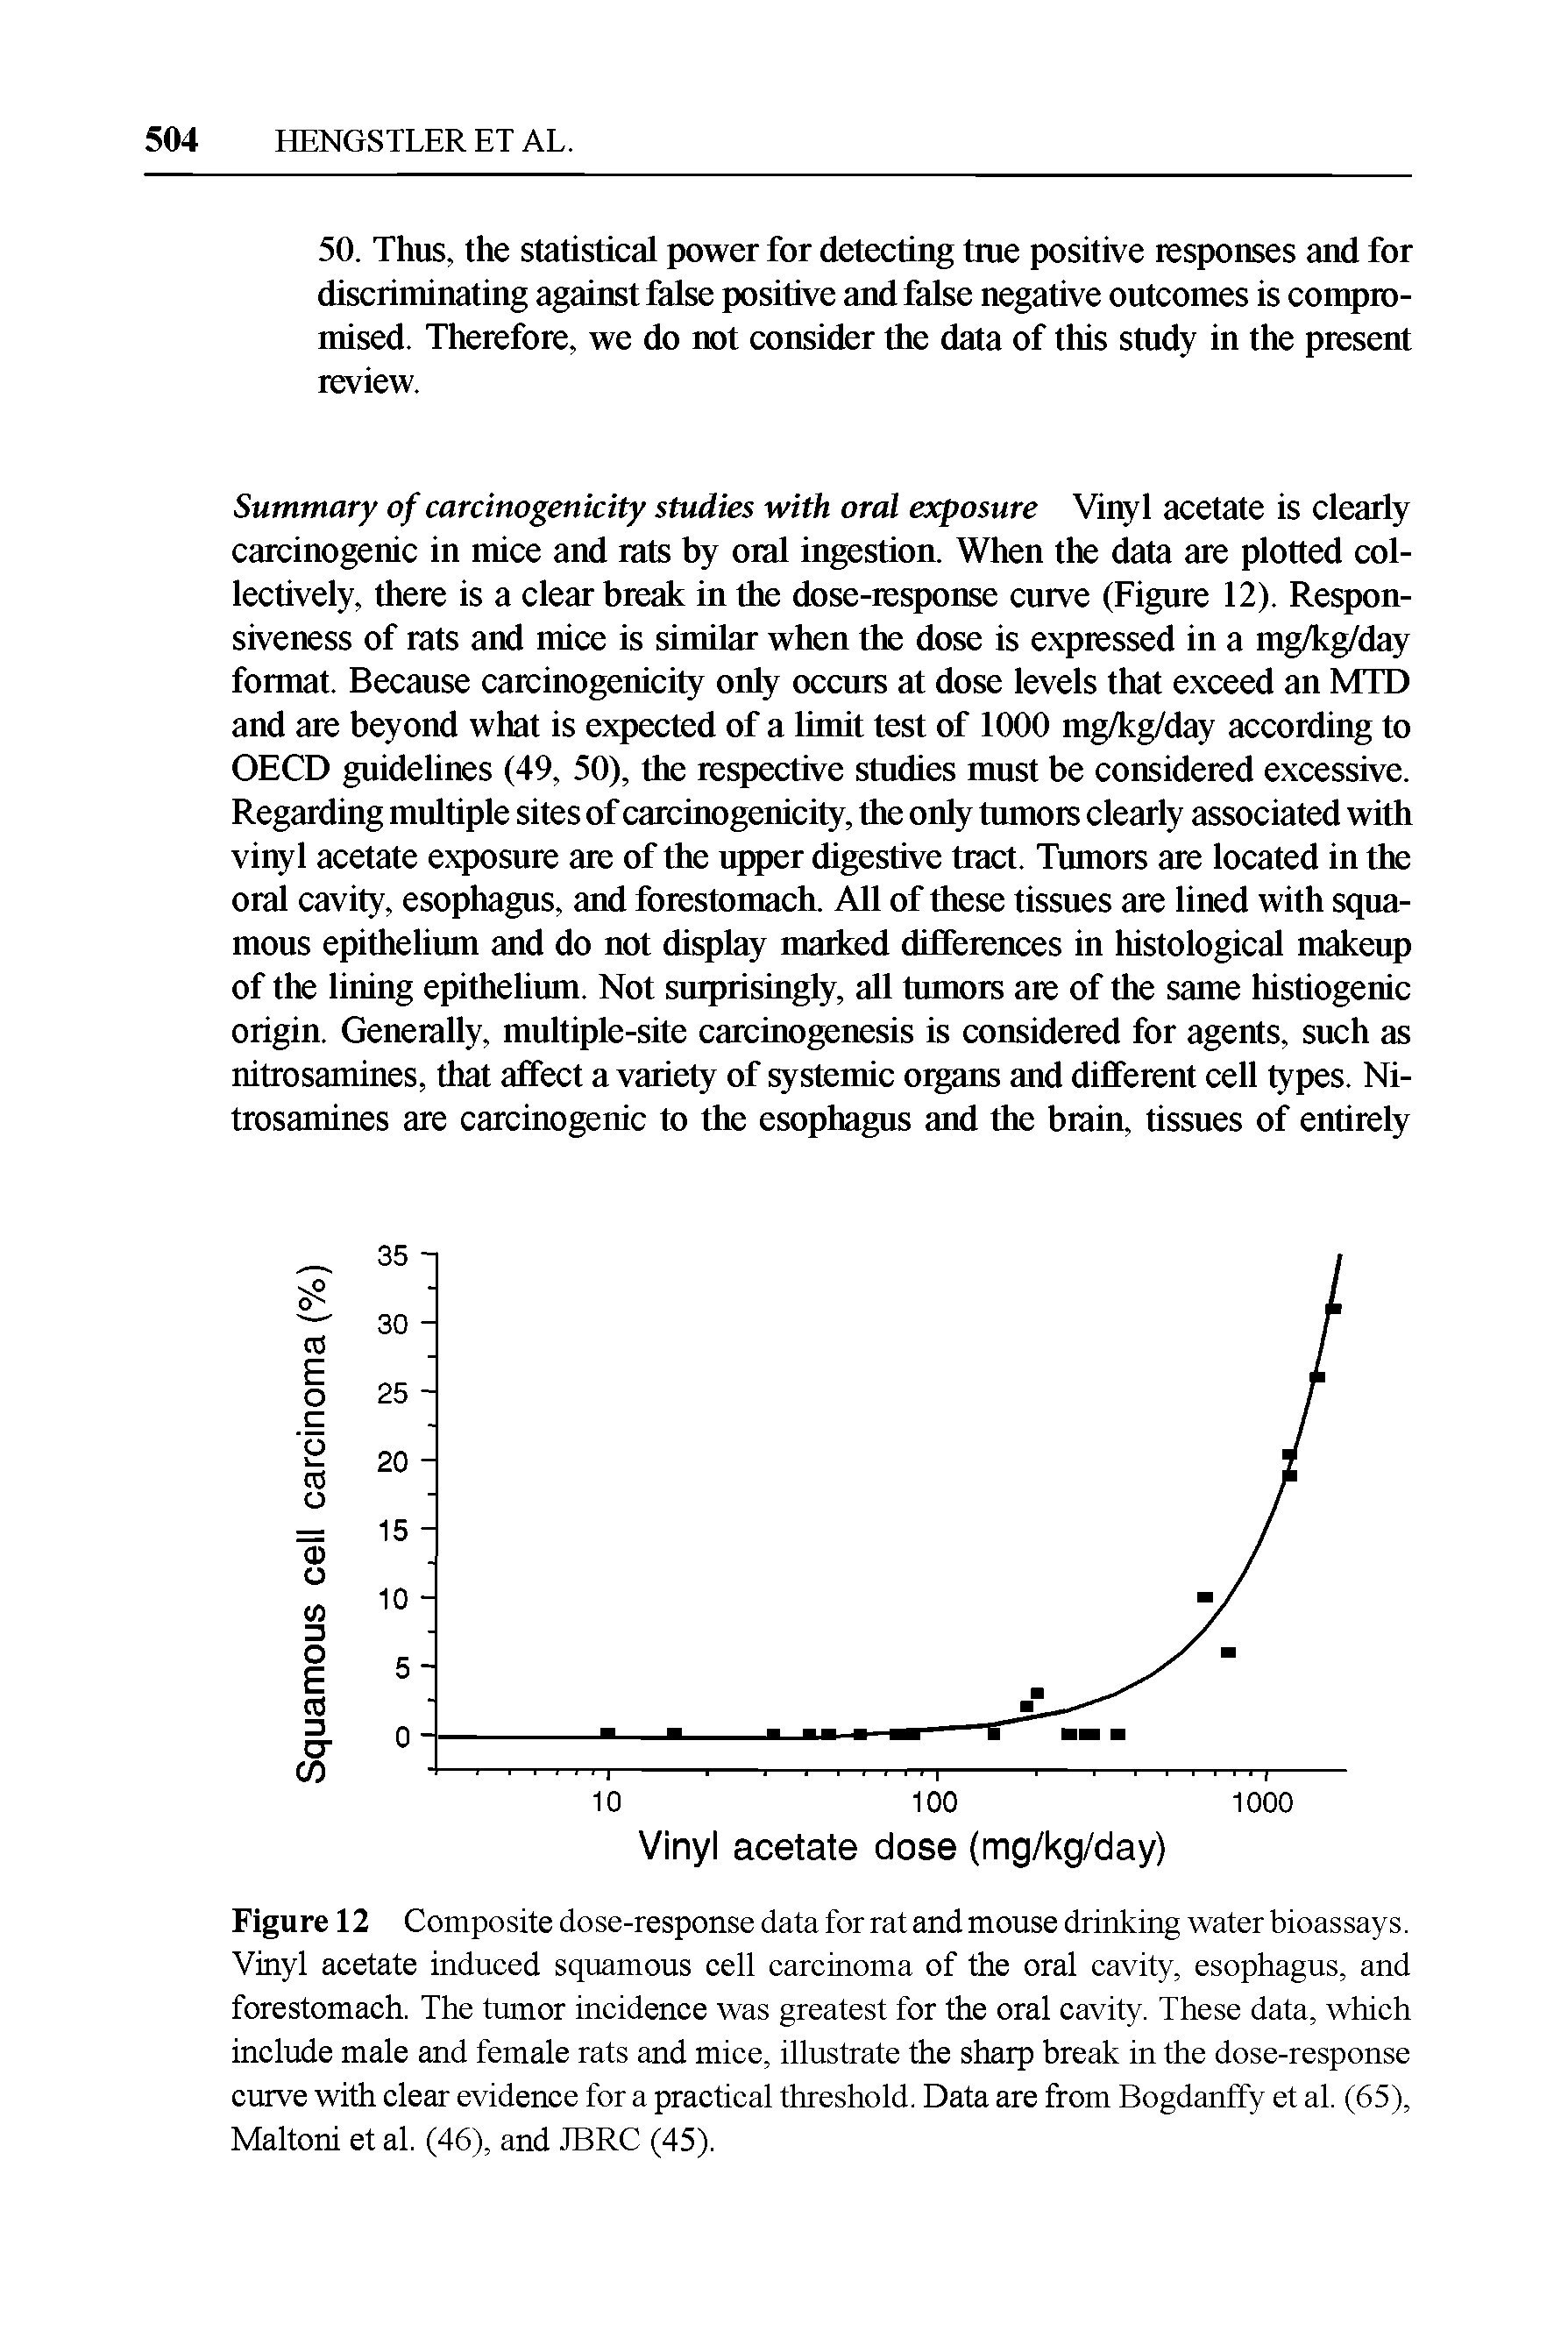 Figure 12 Composite dose-response data for rat and mouse drinking water bioassays. Vinyl acetate induced squamous cell carcinoma of the oral cavity, esophagus, and forestomach. The tumor incidence was greatest for the oral cavity. These data, which include male and female rats and mice, illustrate the sharp break in the dose-response curve with clear evidence for a practical threshold. Data are from Bogdanffy et al. (65), Maltoni et al. (46), and JBRC (45).